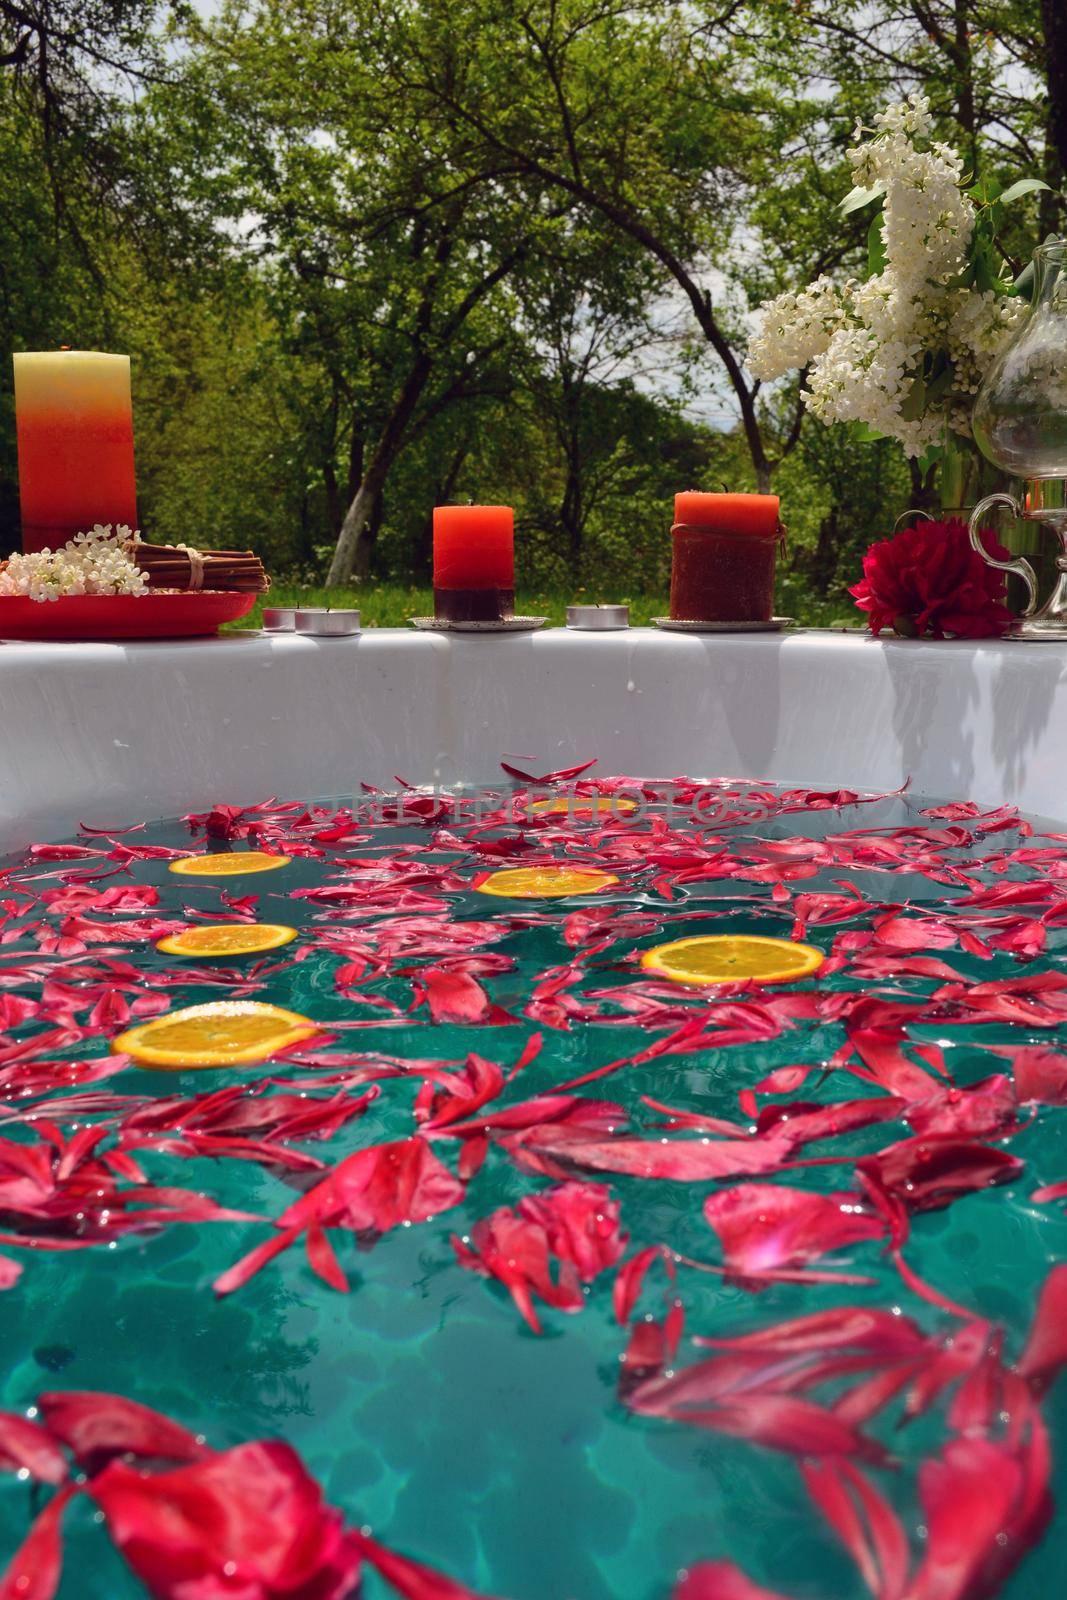 Abstract background with red peony flowers and orange slices in a bathtub outdoor